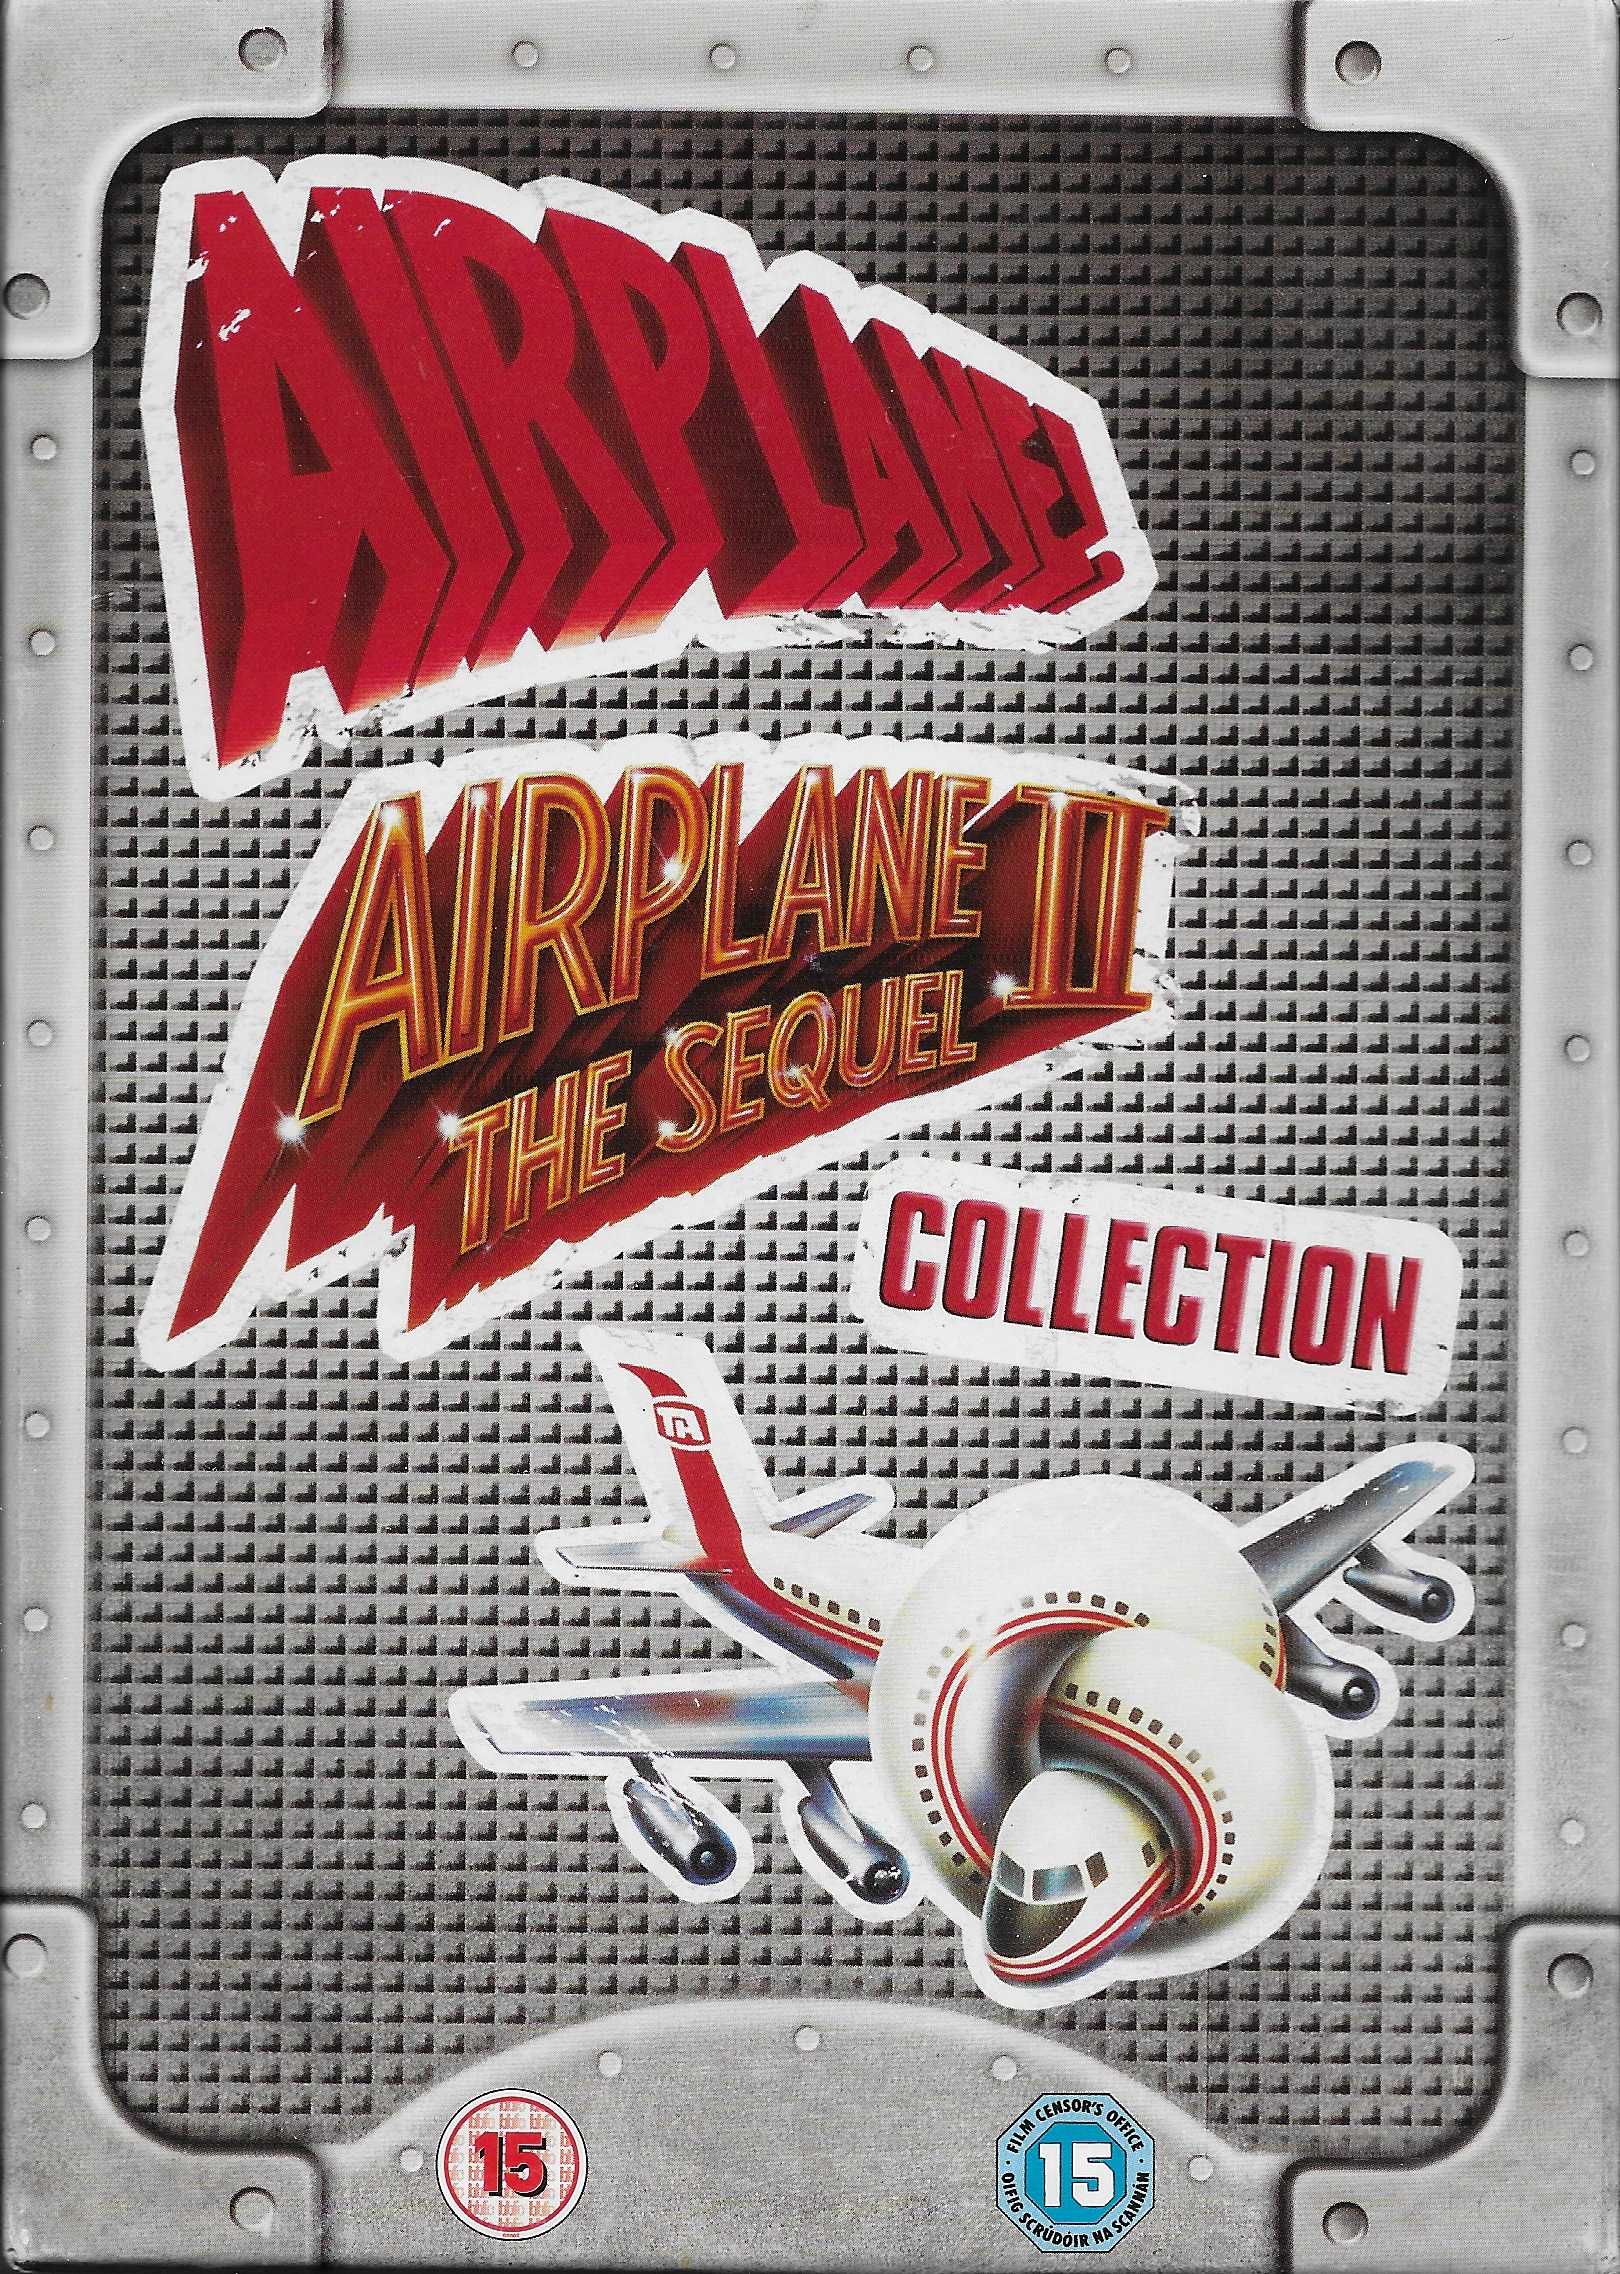 Picture of PHE 9124 Airplane! Airplane II the sequel collection by artist Jim Abrahams / David Zucker / Jerry Zucker / Ken Finkleman from ITV, Channel 4 and Channel 5 library